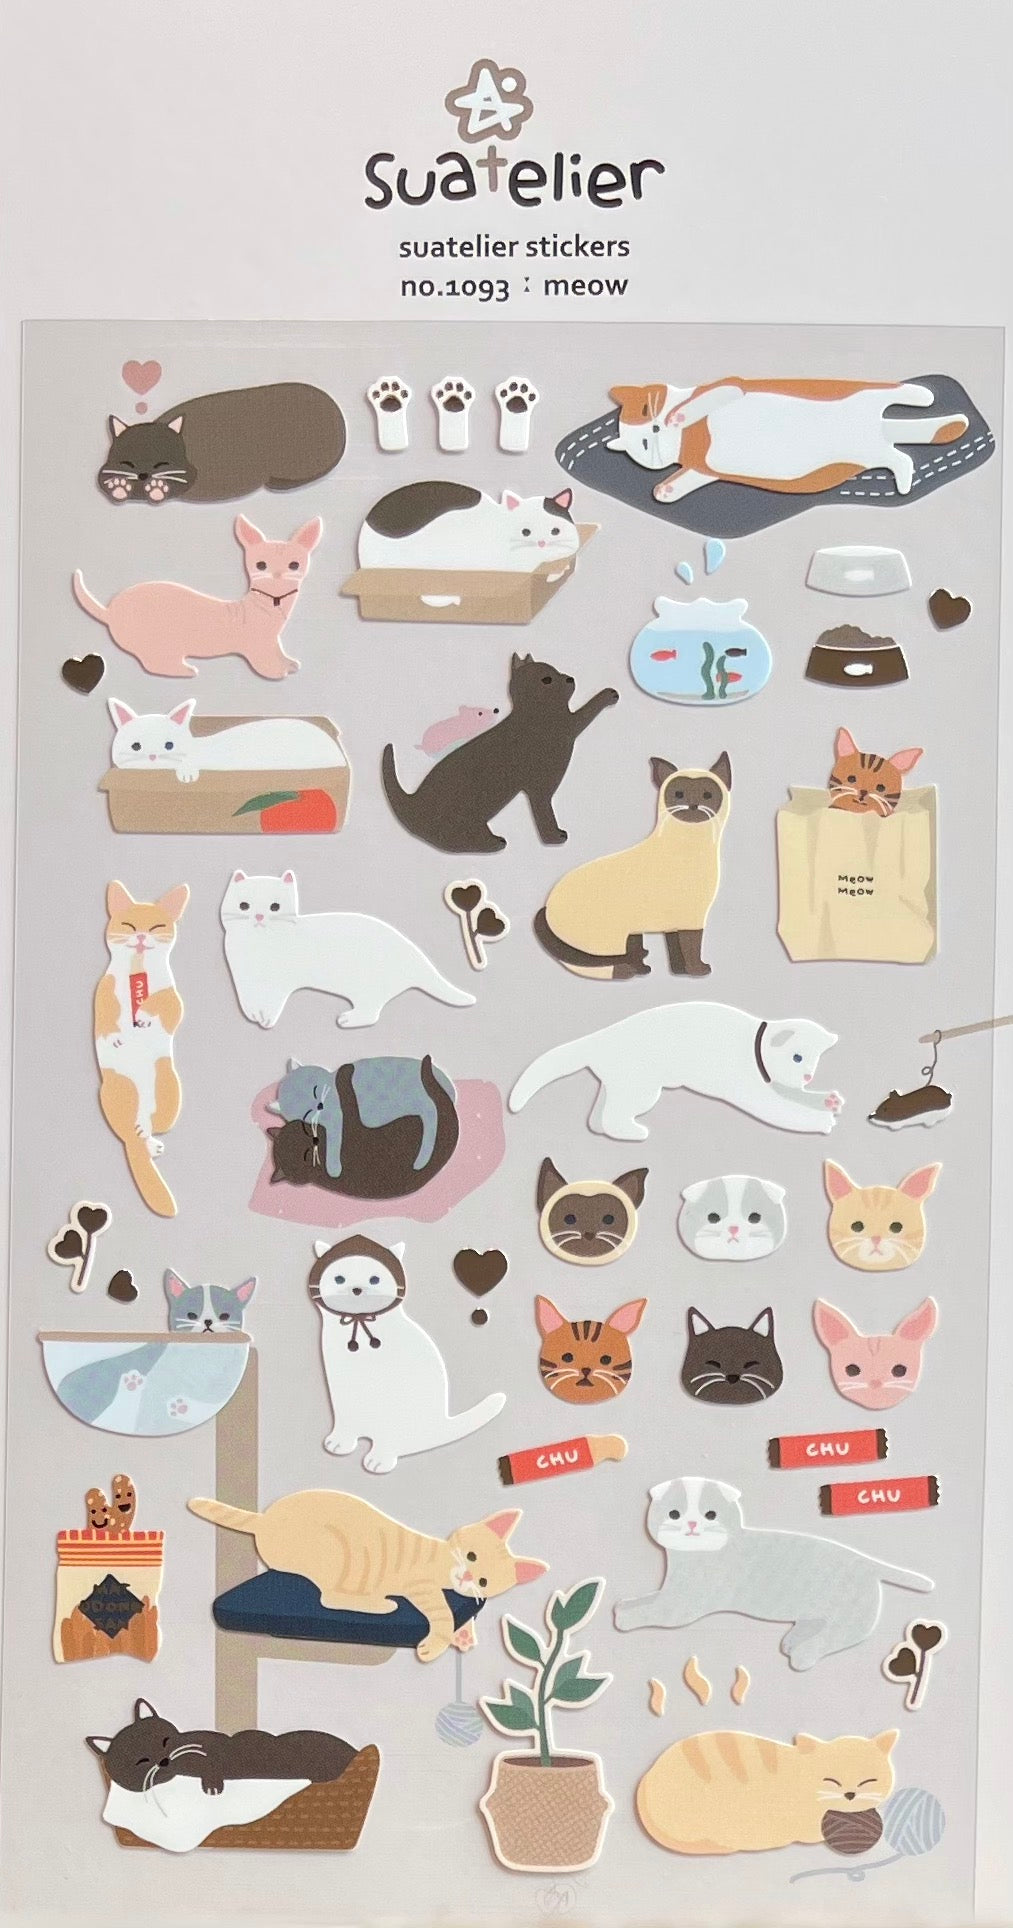 Suatelier stickers - Meow